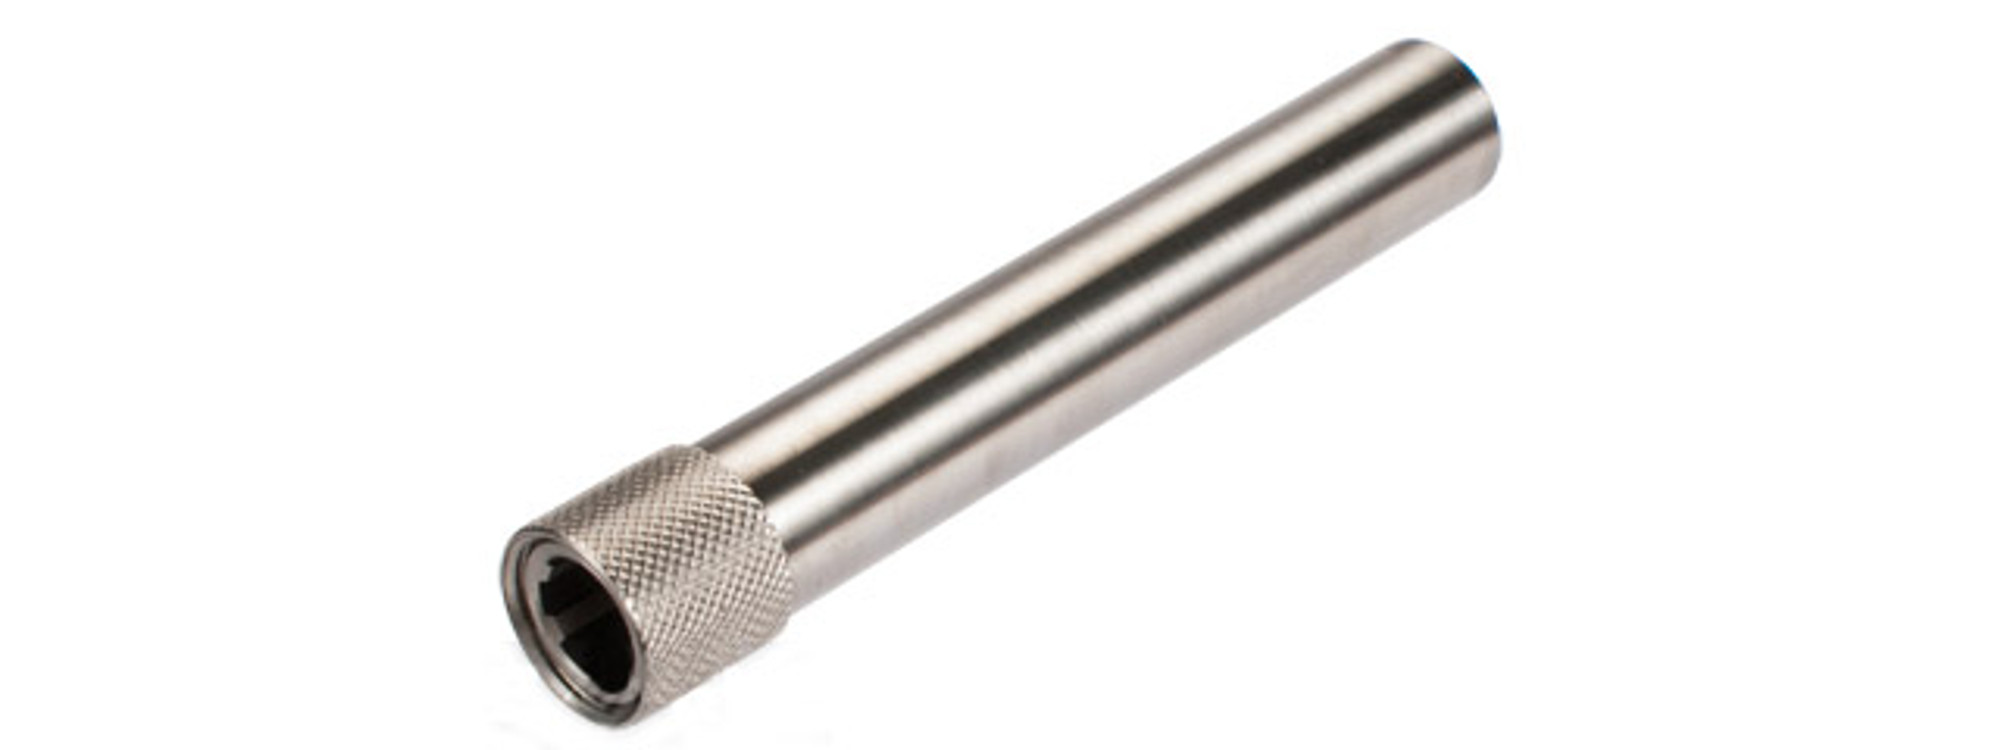 Guarder Threaded Steel Outer Barrel for KJW / TM P226 Airsoft GBB Pistols - Silver / 14mm Positive